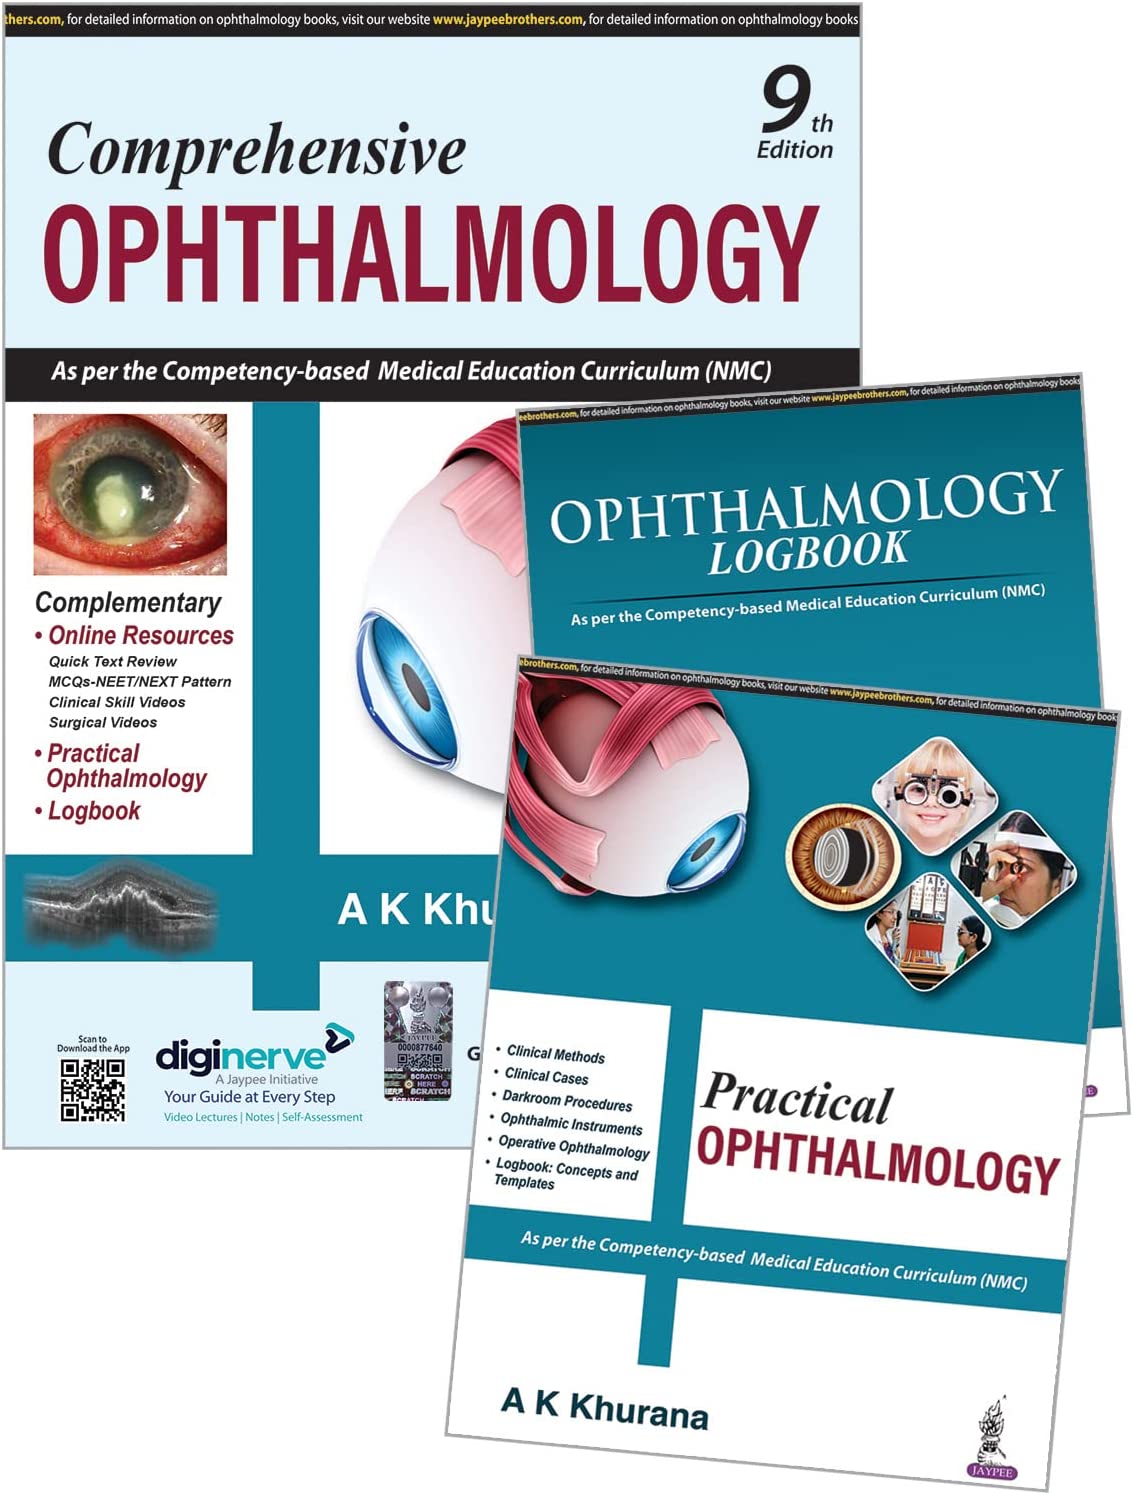 Comprehensive Ophthalmology With Ophthalmology Logbook Plus Practical Ophthalmology by KHURANA 9E 2023